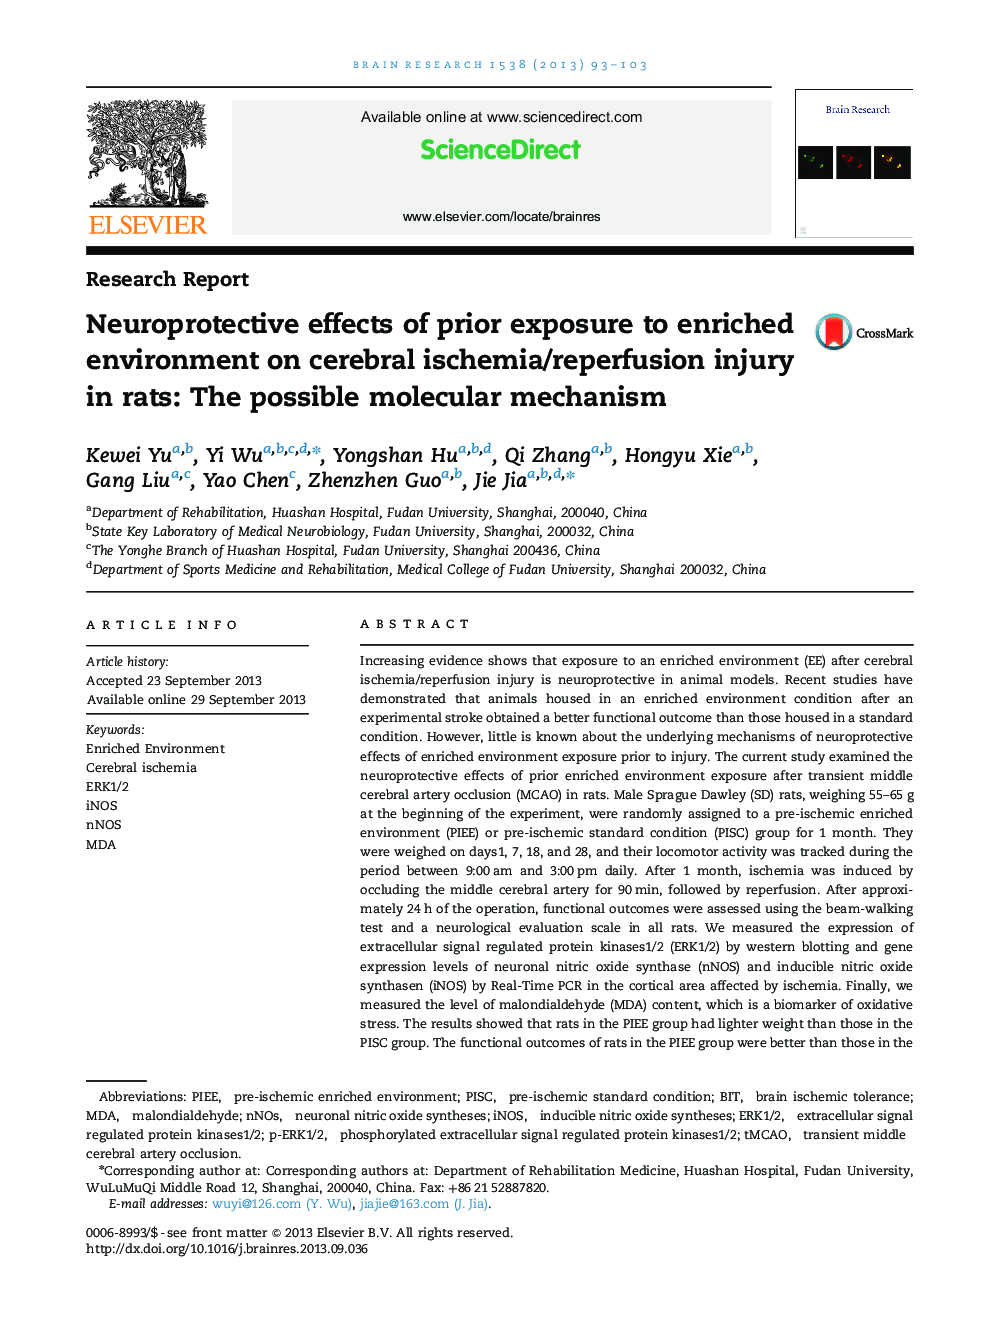 Research ReportNeuroprotective effects of prior exposure to enriched environment on cerebral ischemia/reperfusion injury in rats: The possible molecular mechanism